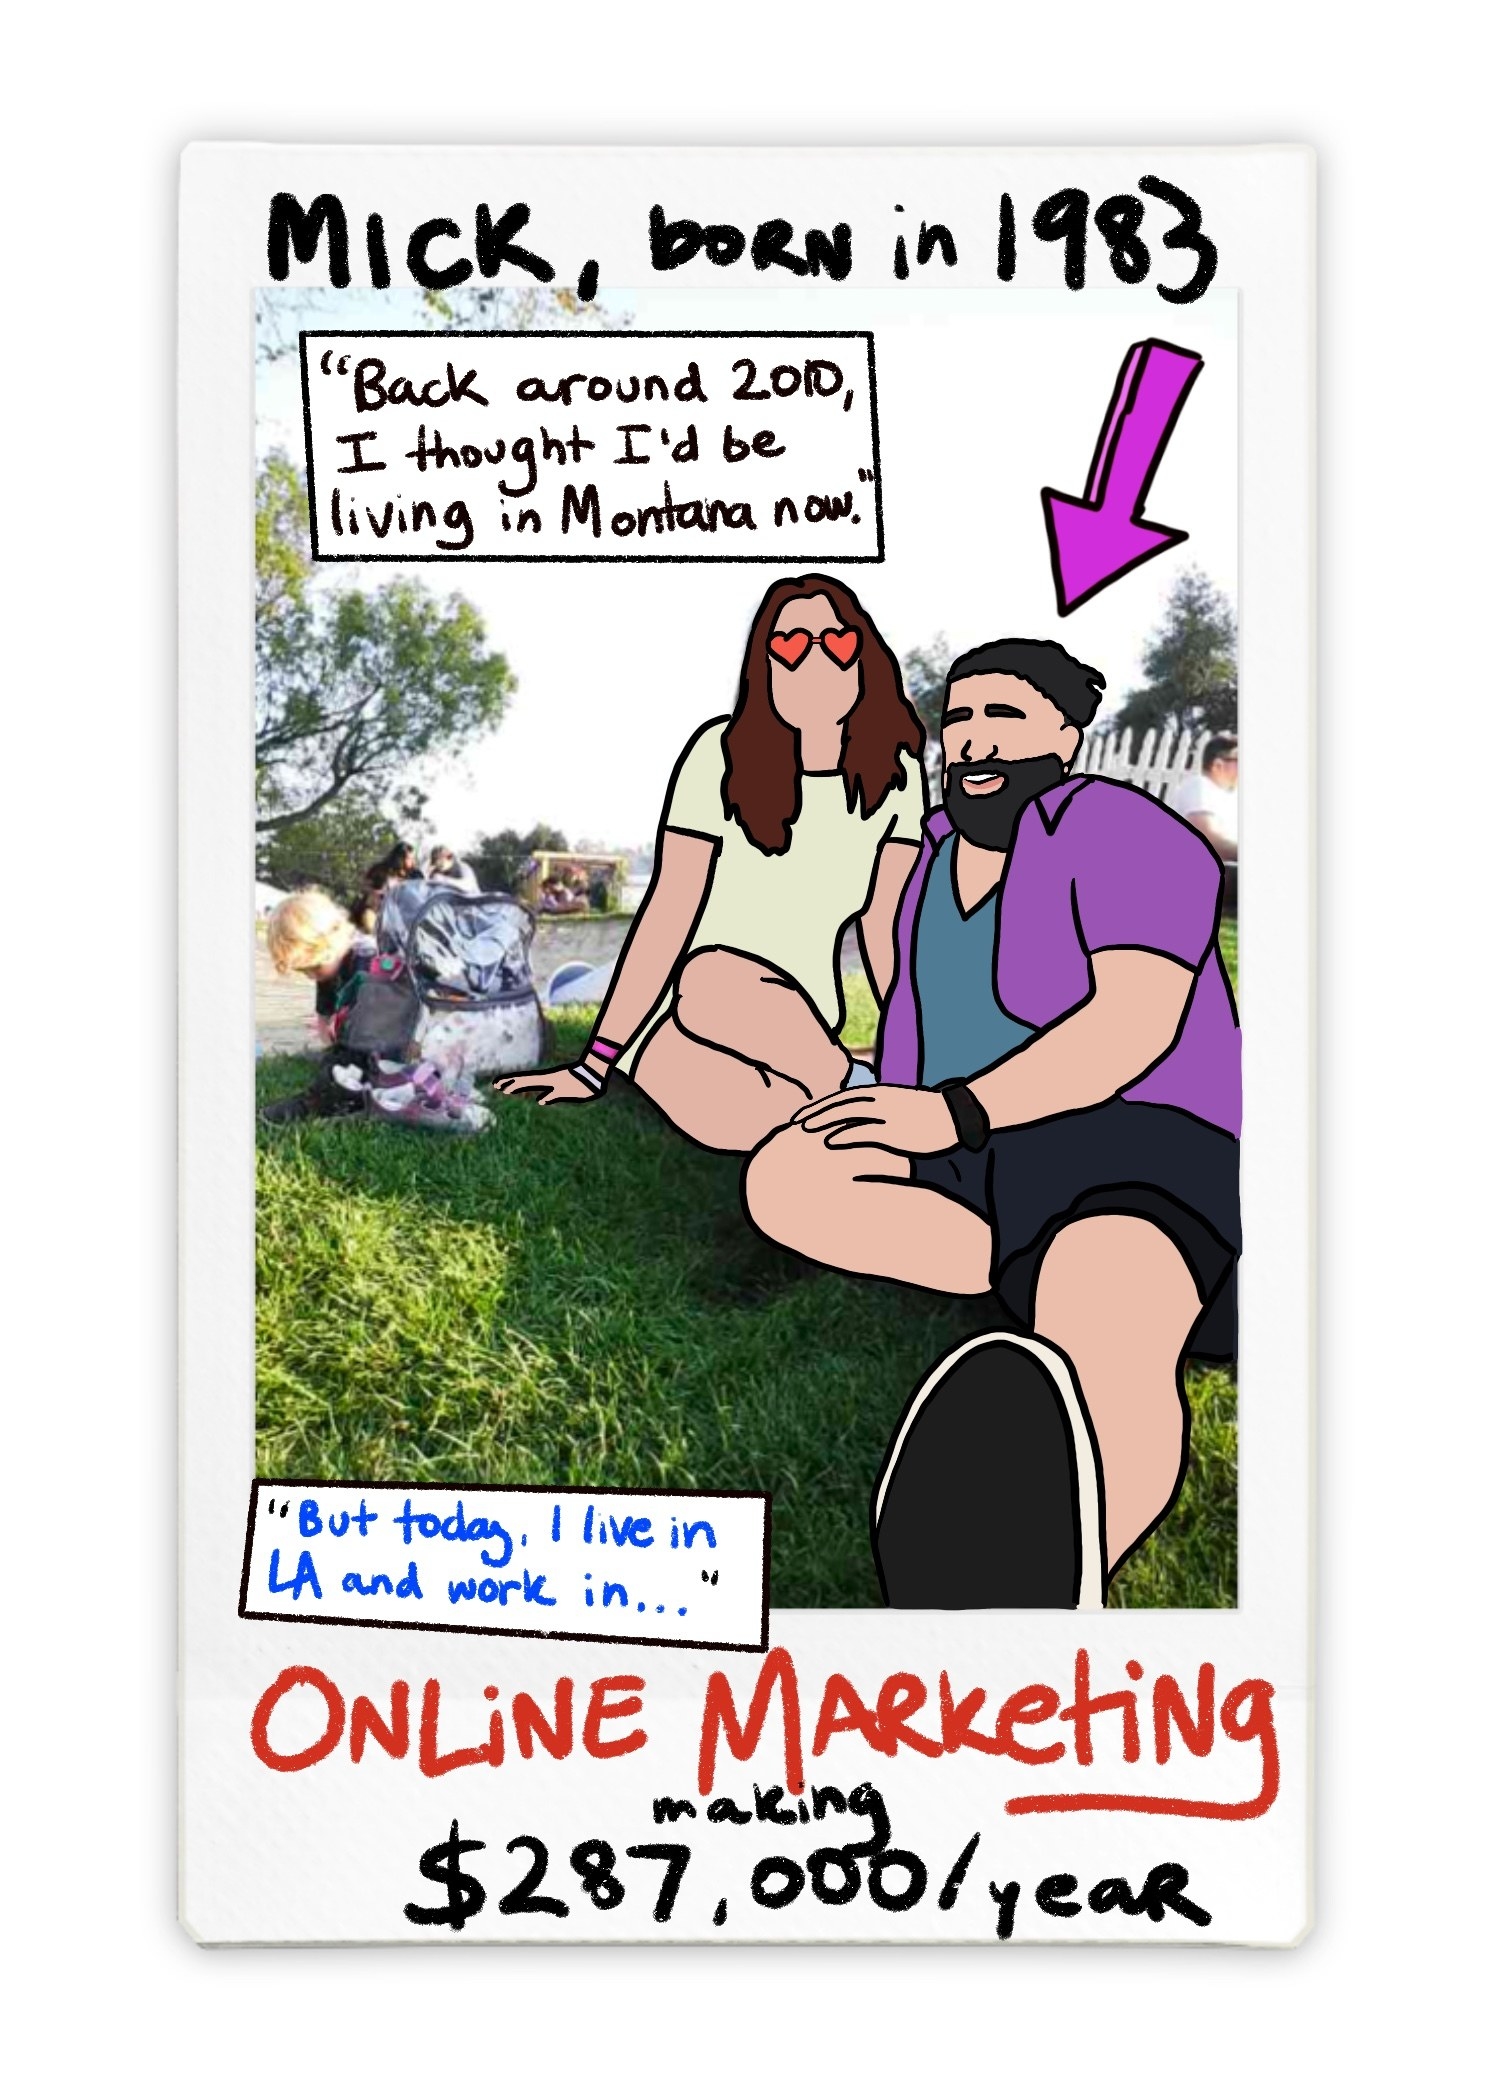 Mick in online marketing used to think he&#x27;d be stuck in Montana